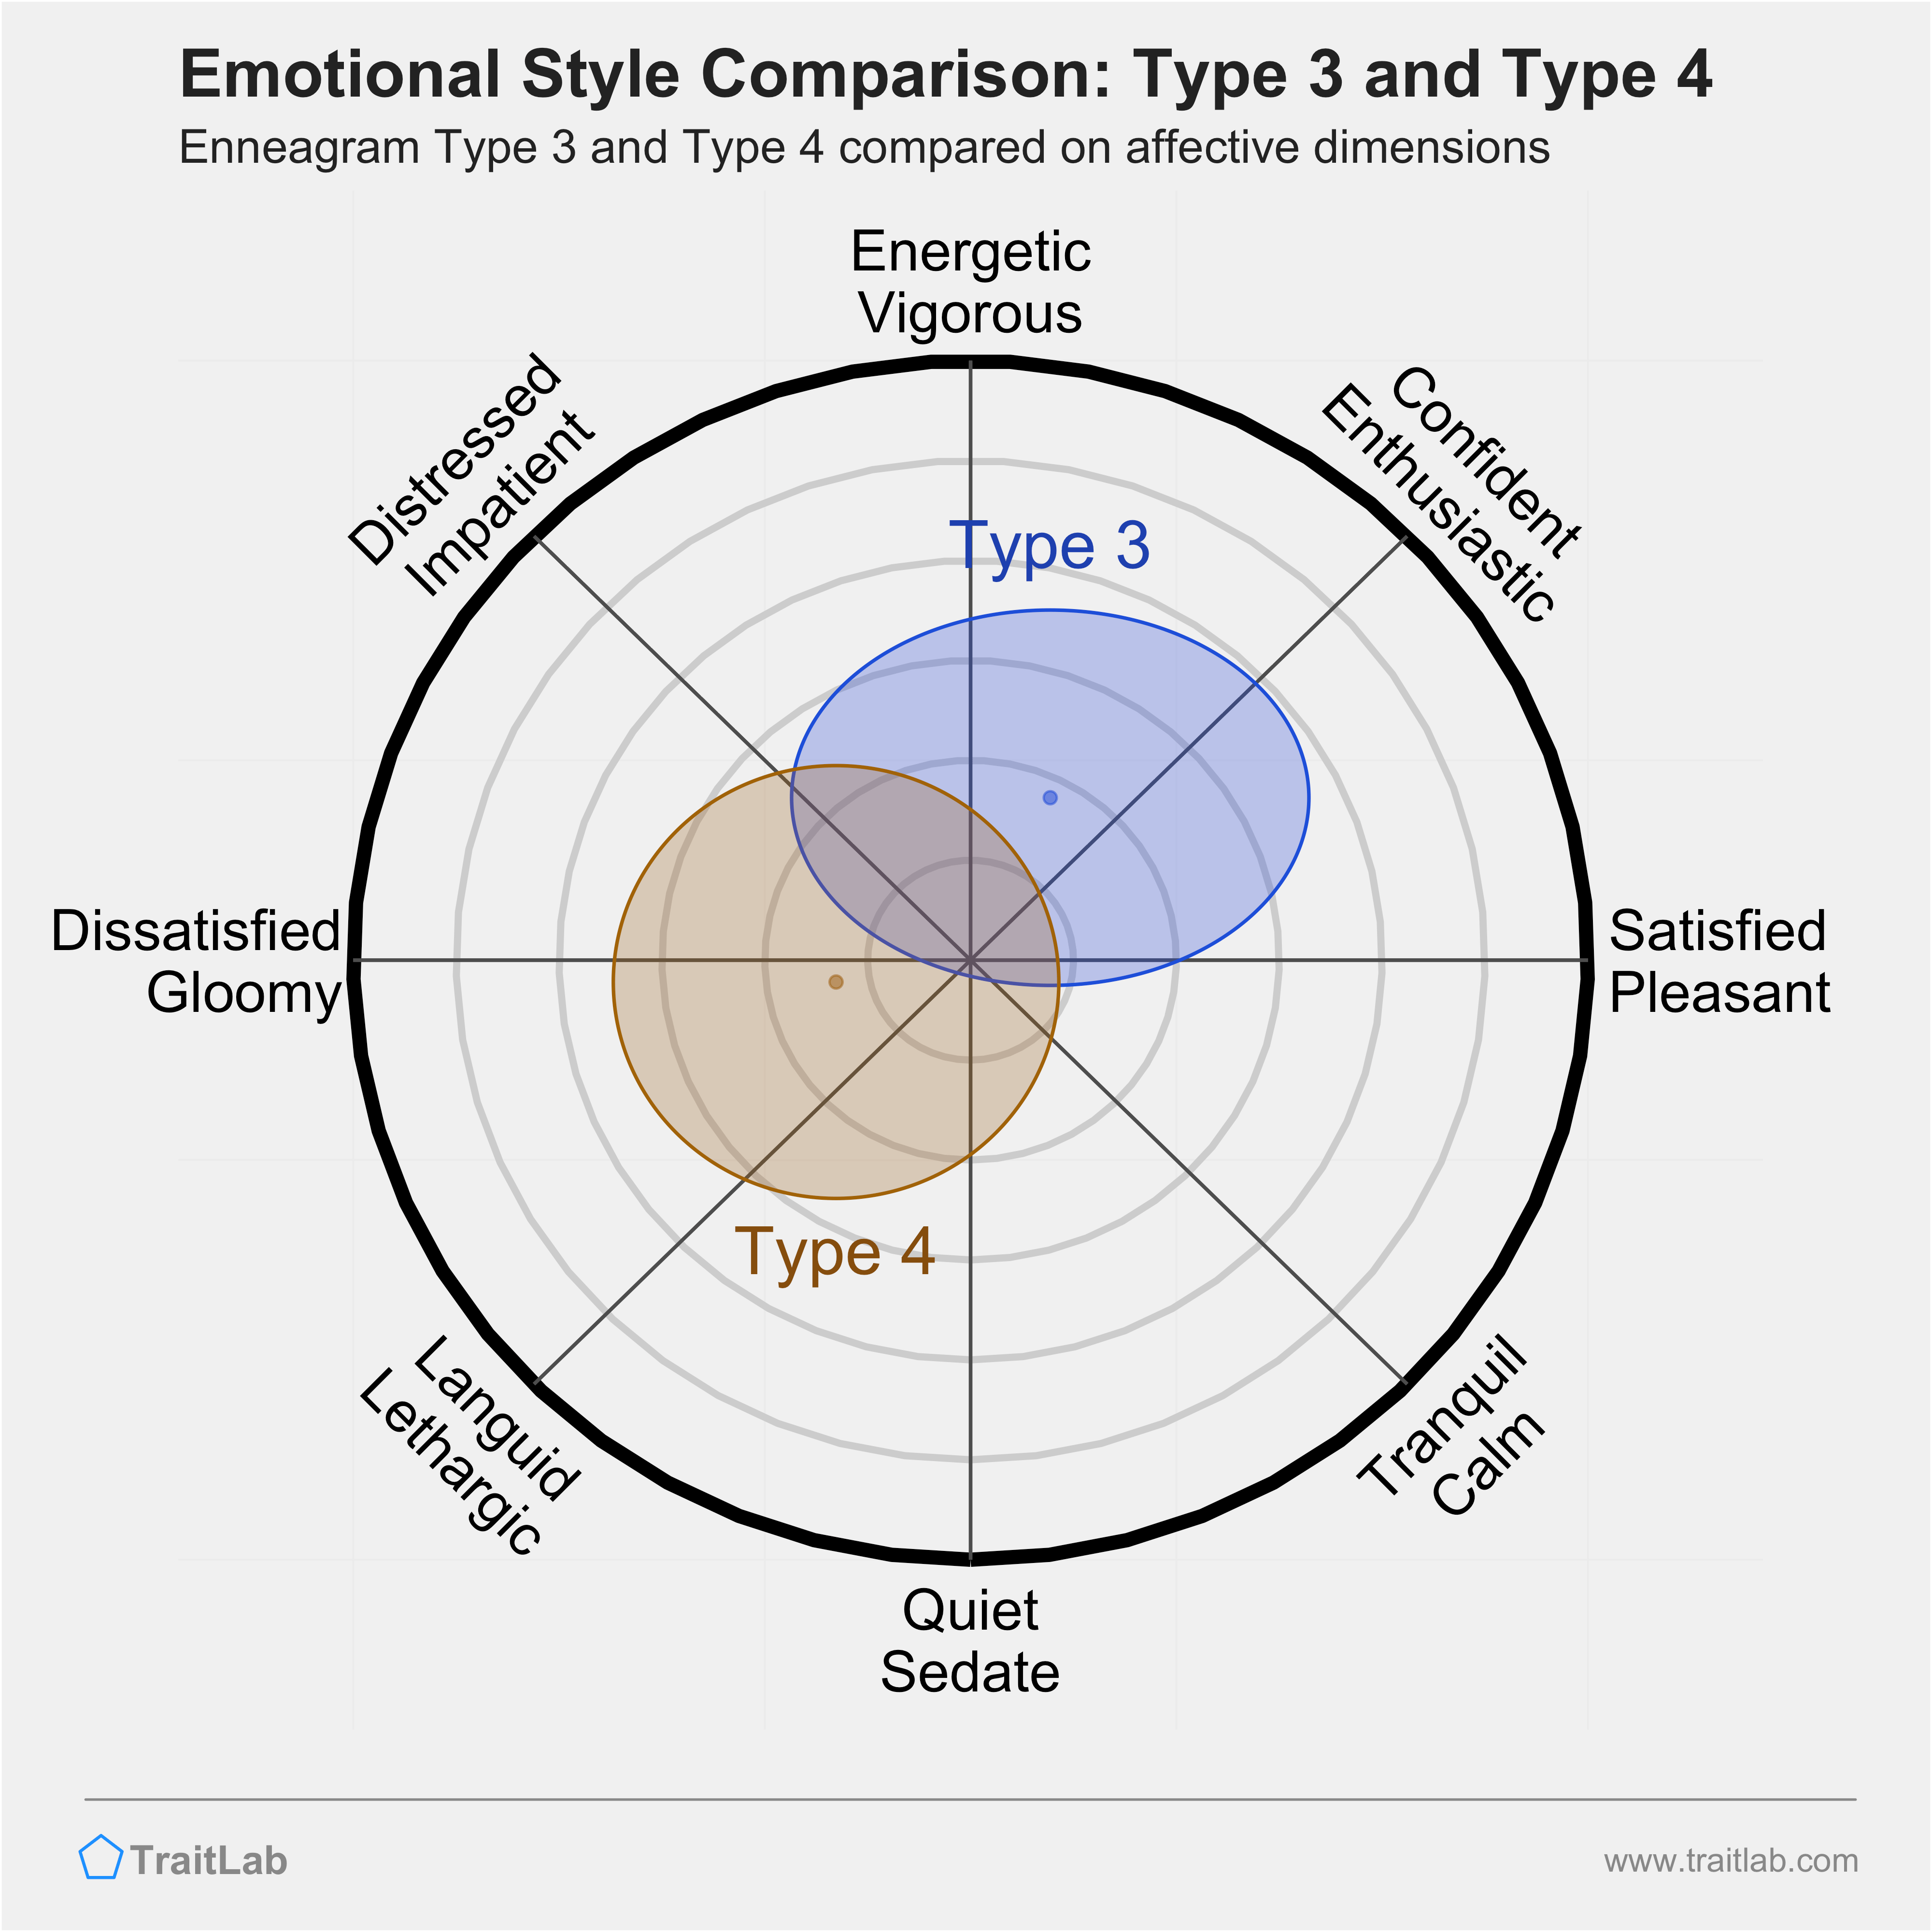 Type 3 and Type 4 comparison across emotional (affective) dimensions